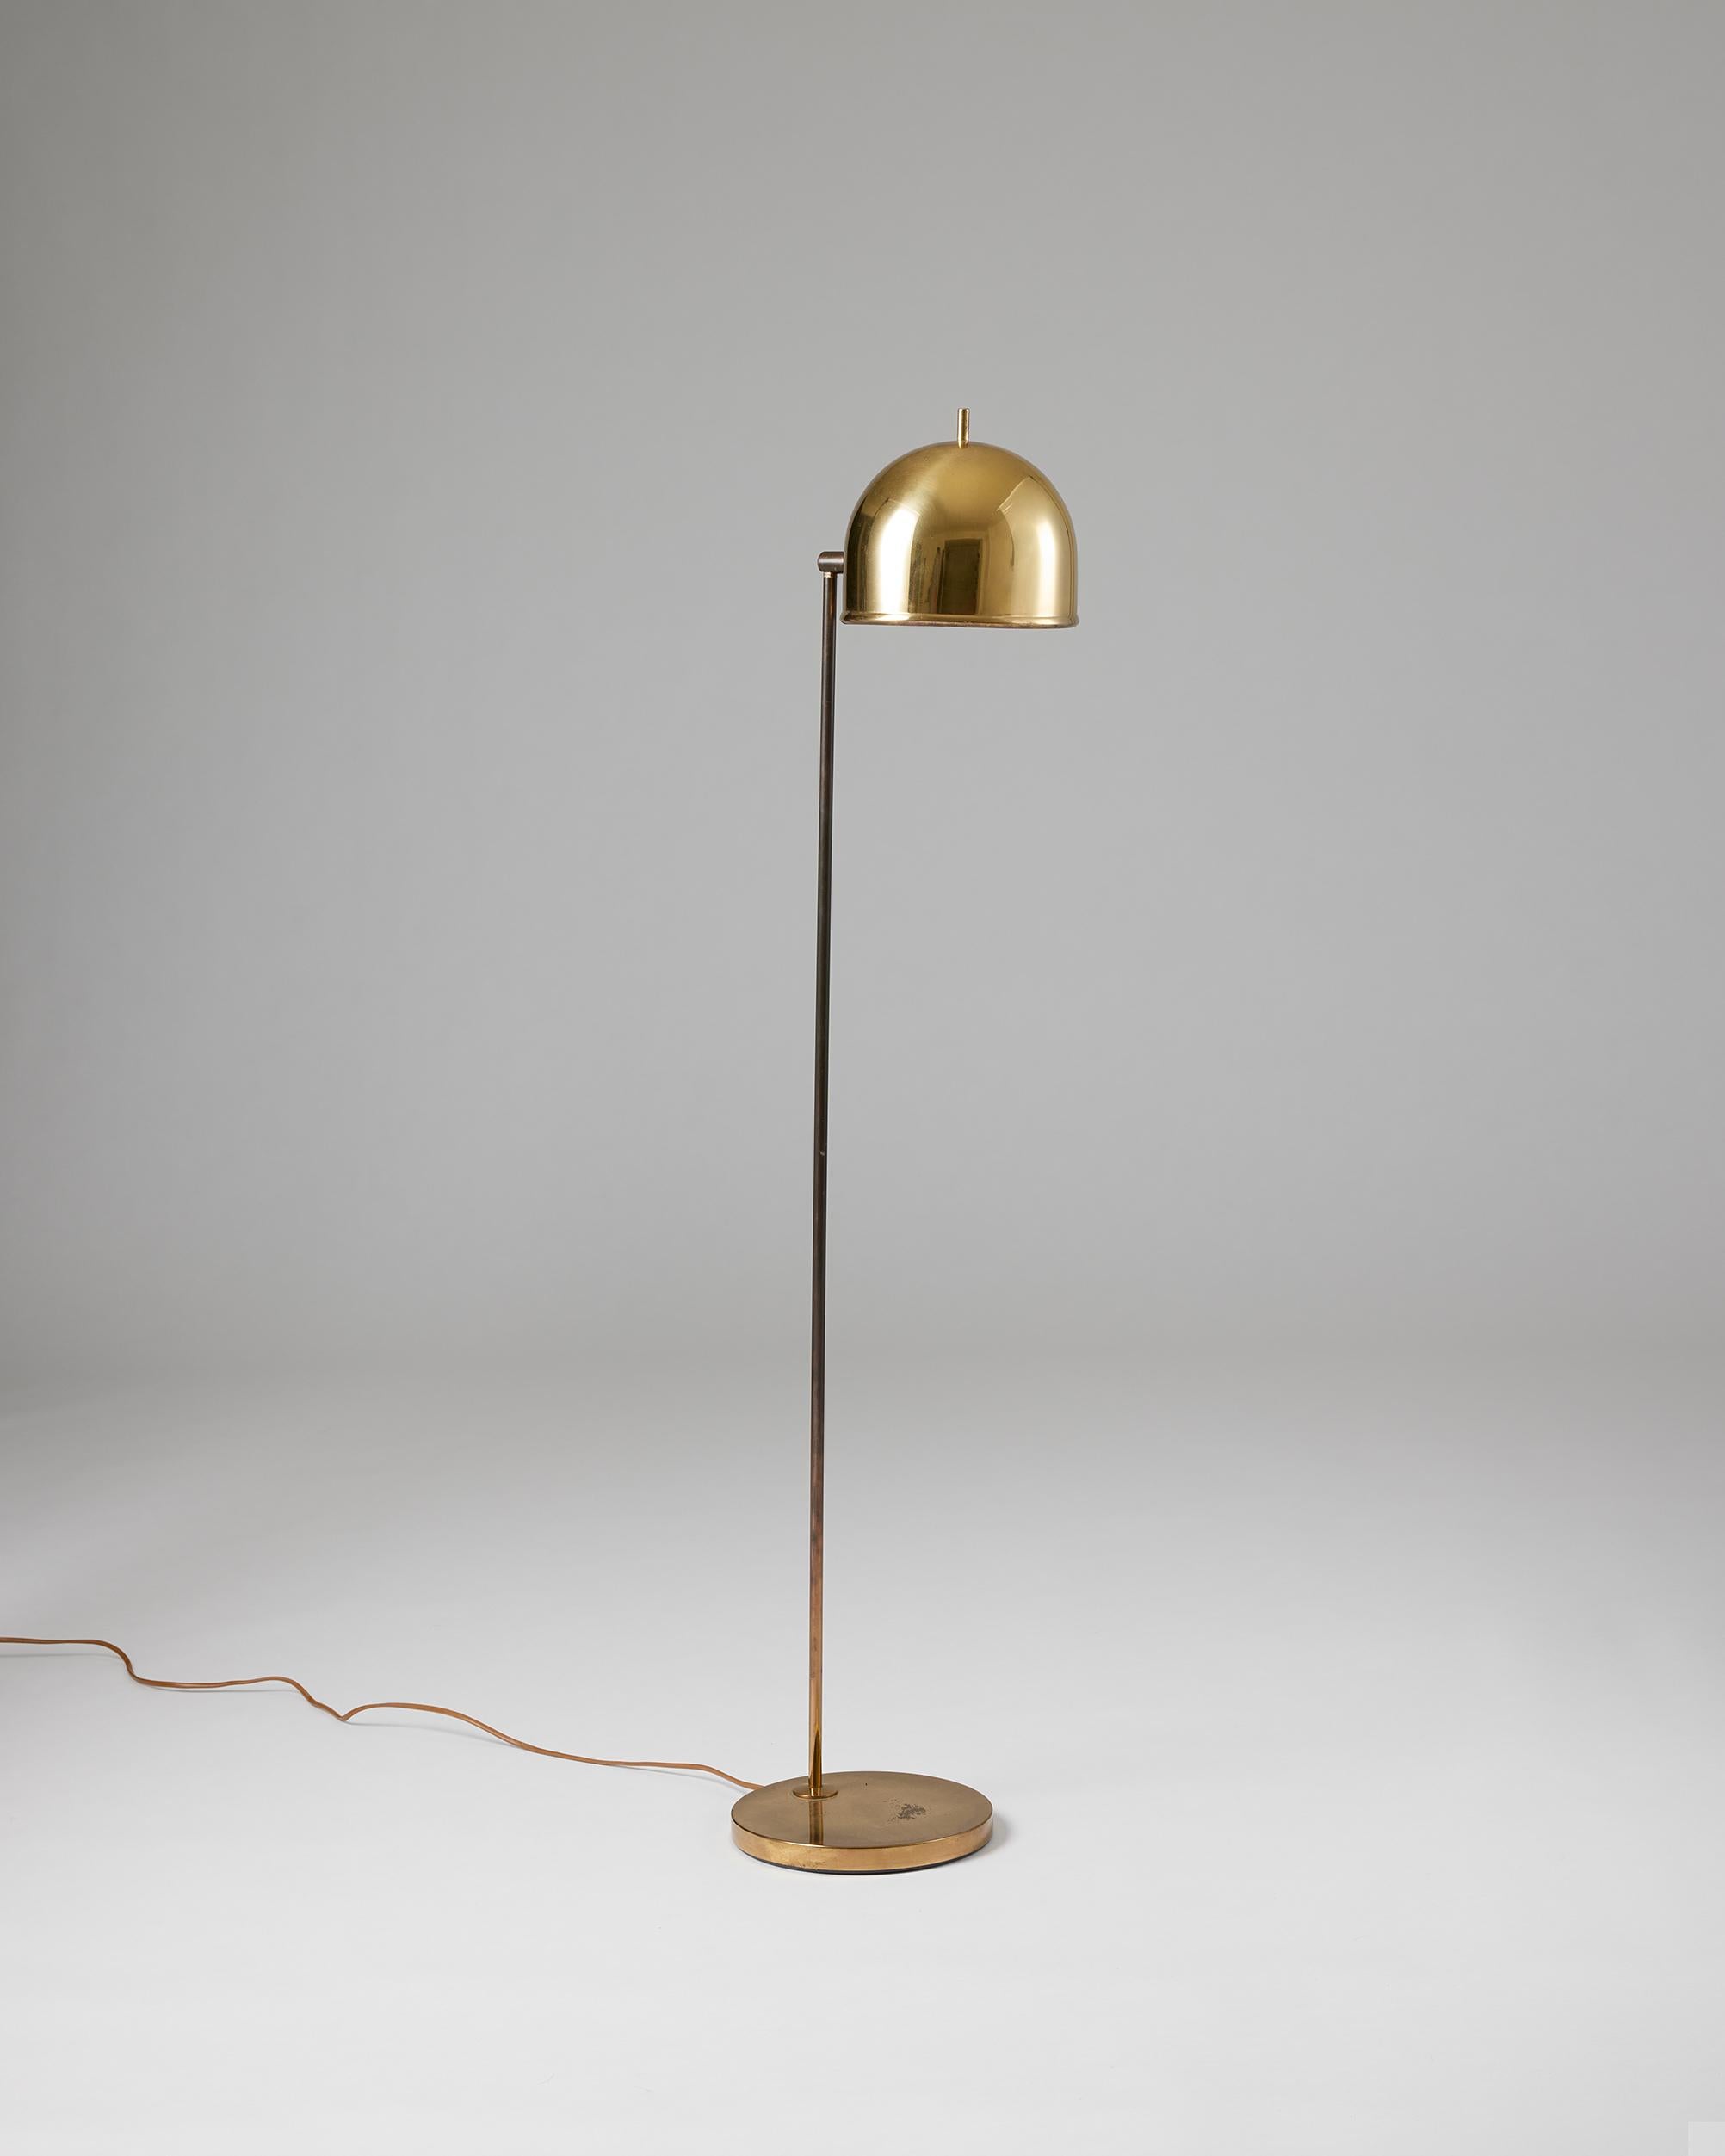 Floor lamp model G-075 designed by Eje Ahlgren for Bergboms,
Sweden, 1960s.

Brass.

This floor lamp, made with a fully adjustable shade, was manufactured in brass by Bergboms and designed by Eje Ahlgren. The protruding brass rod at the top of the